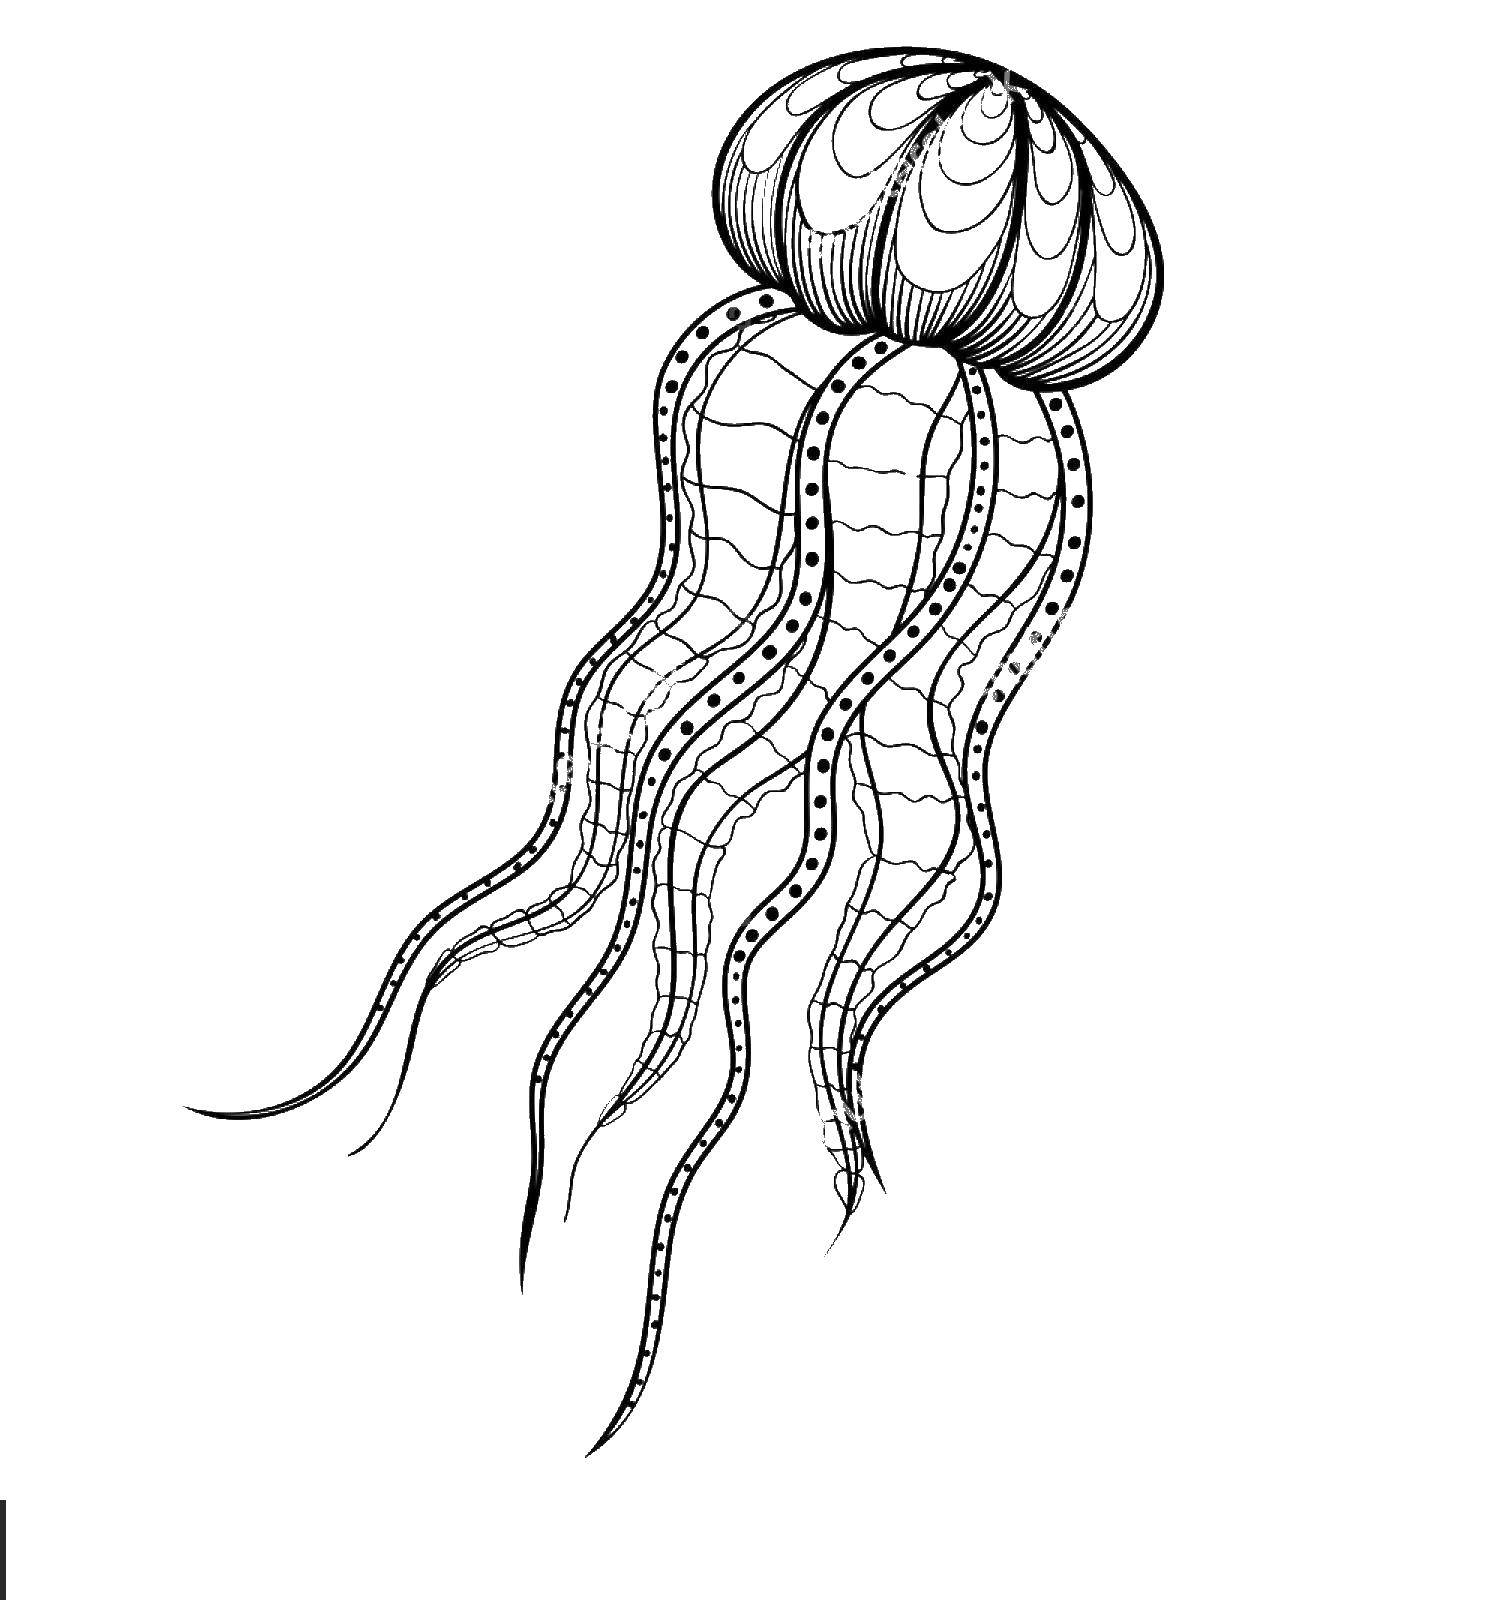 Coloring Patterned jellyfish. Category Sea animals. Tags:  Underwater world, jellyfish.